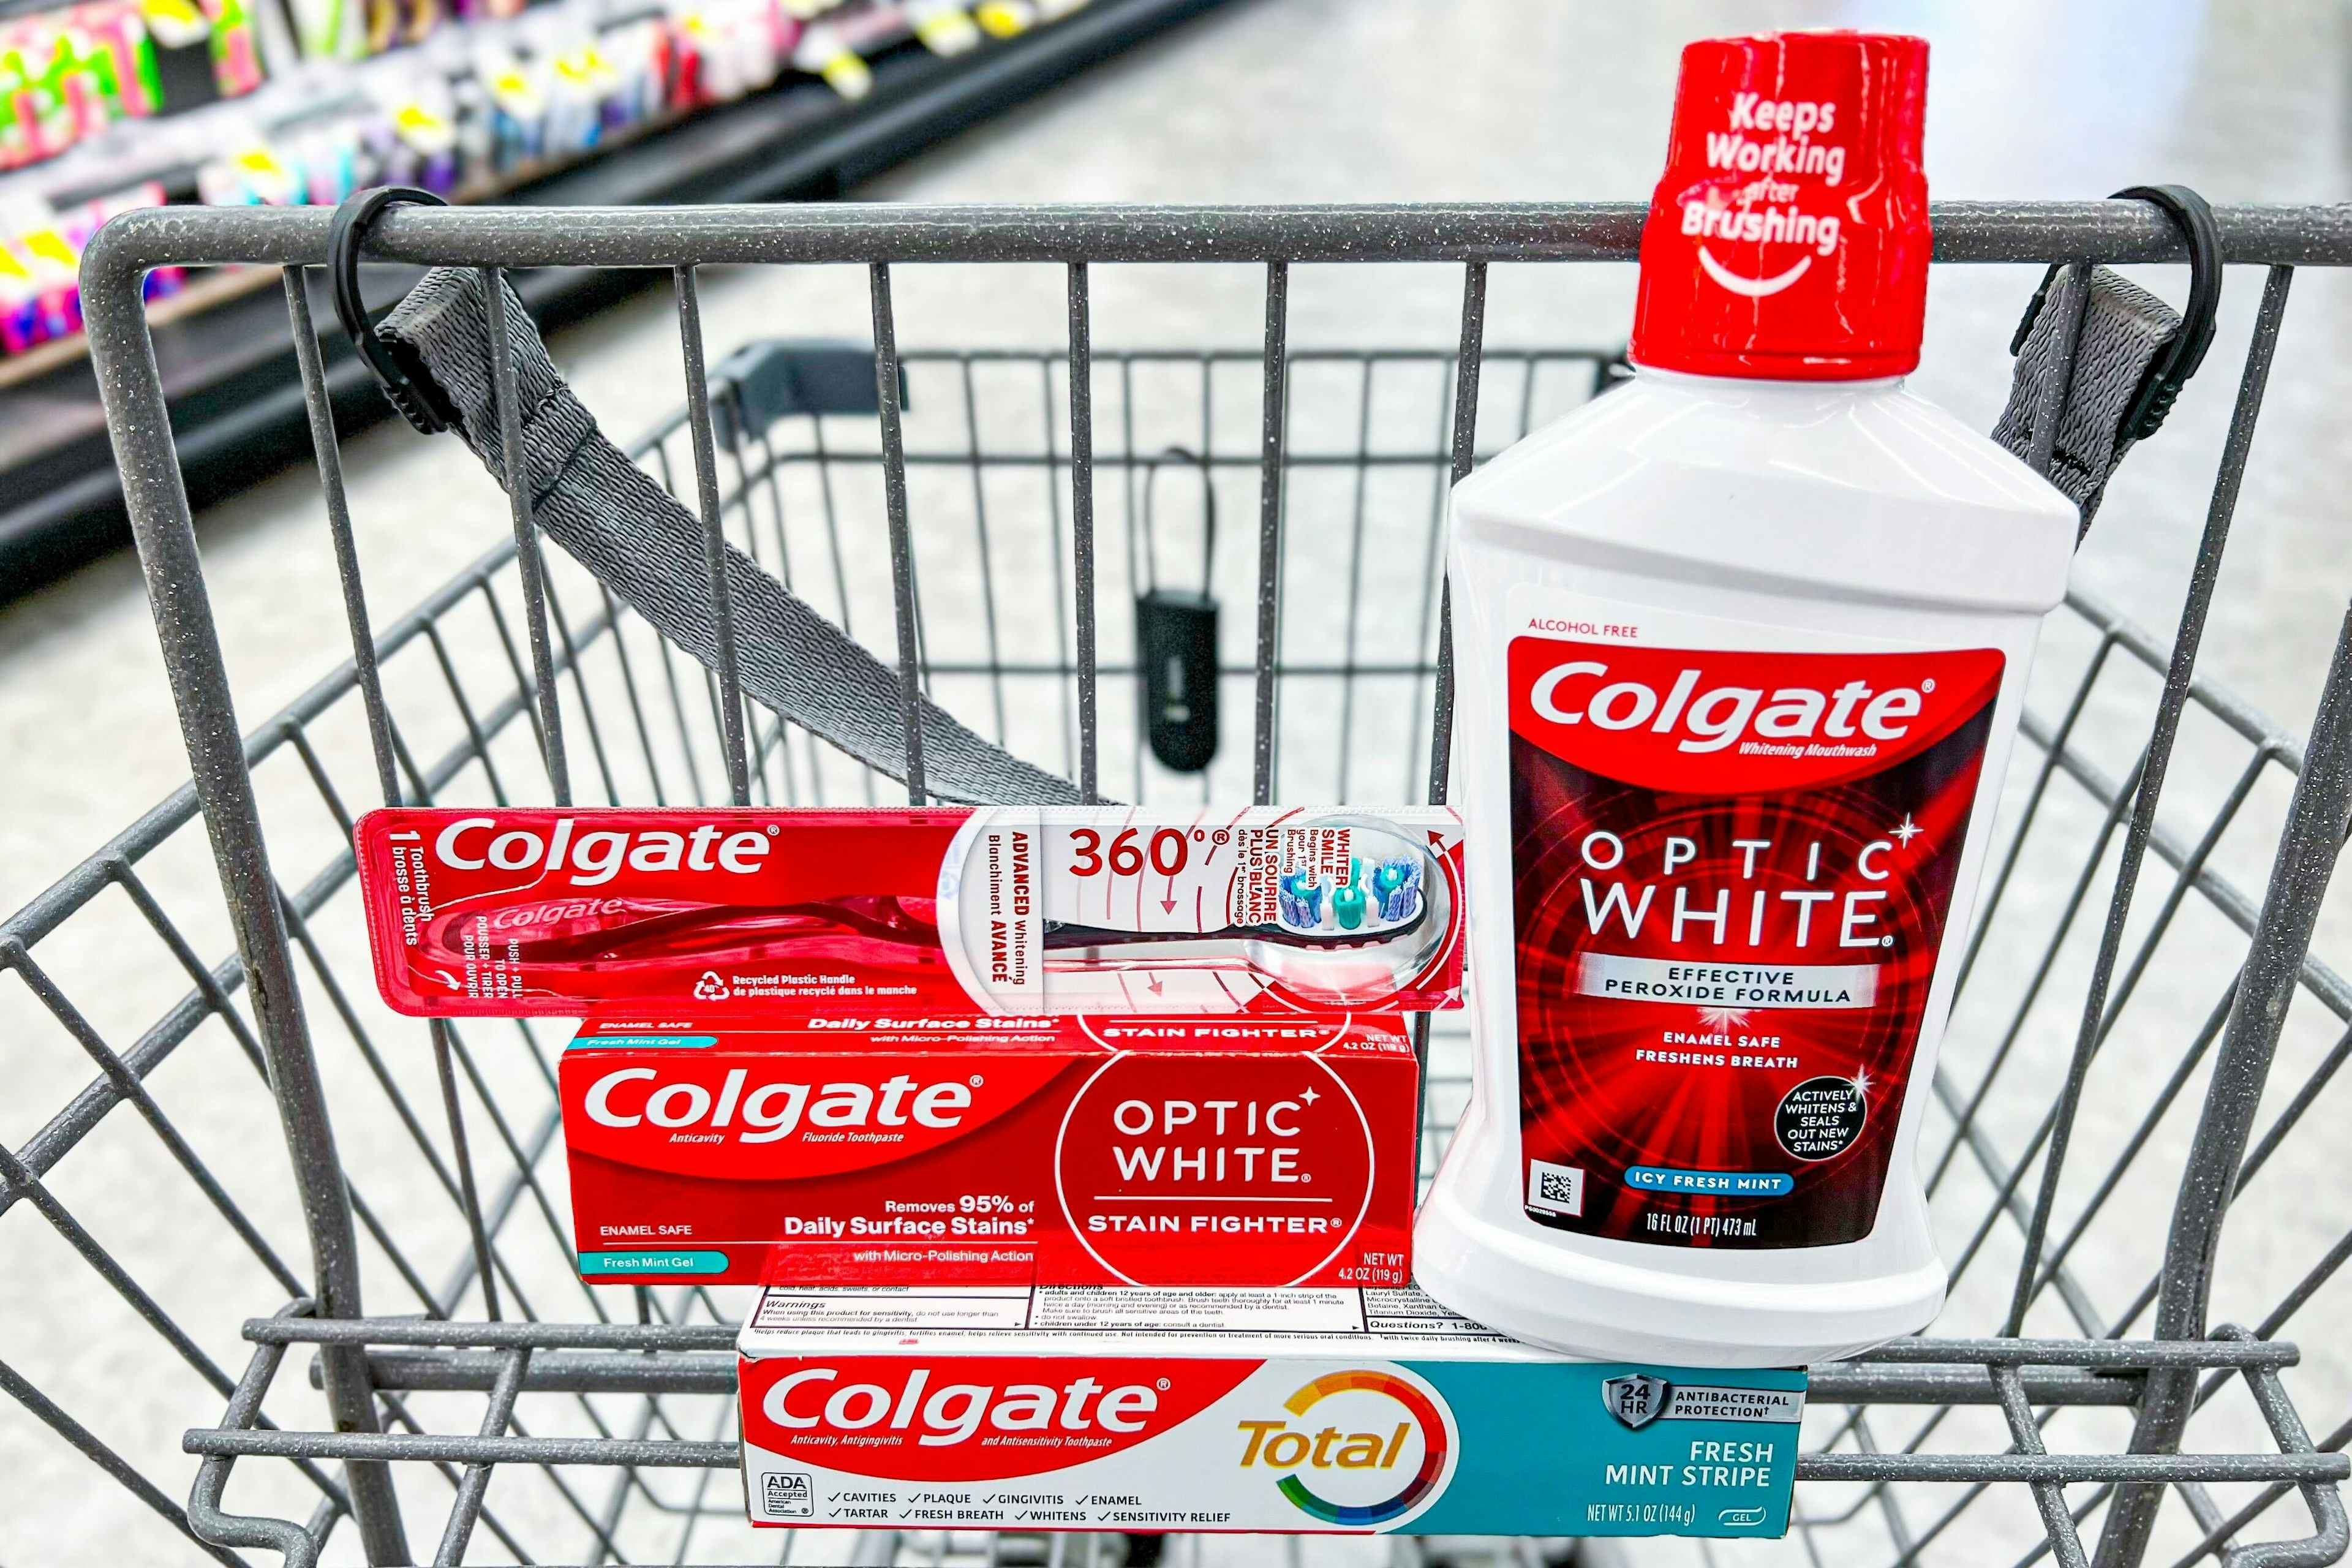 walgreens colgate toothpaste, mouthwash and toothbrush696